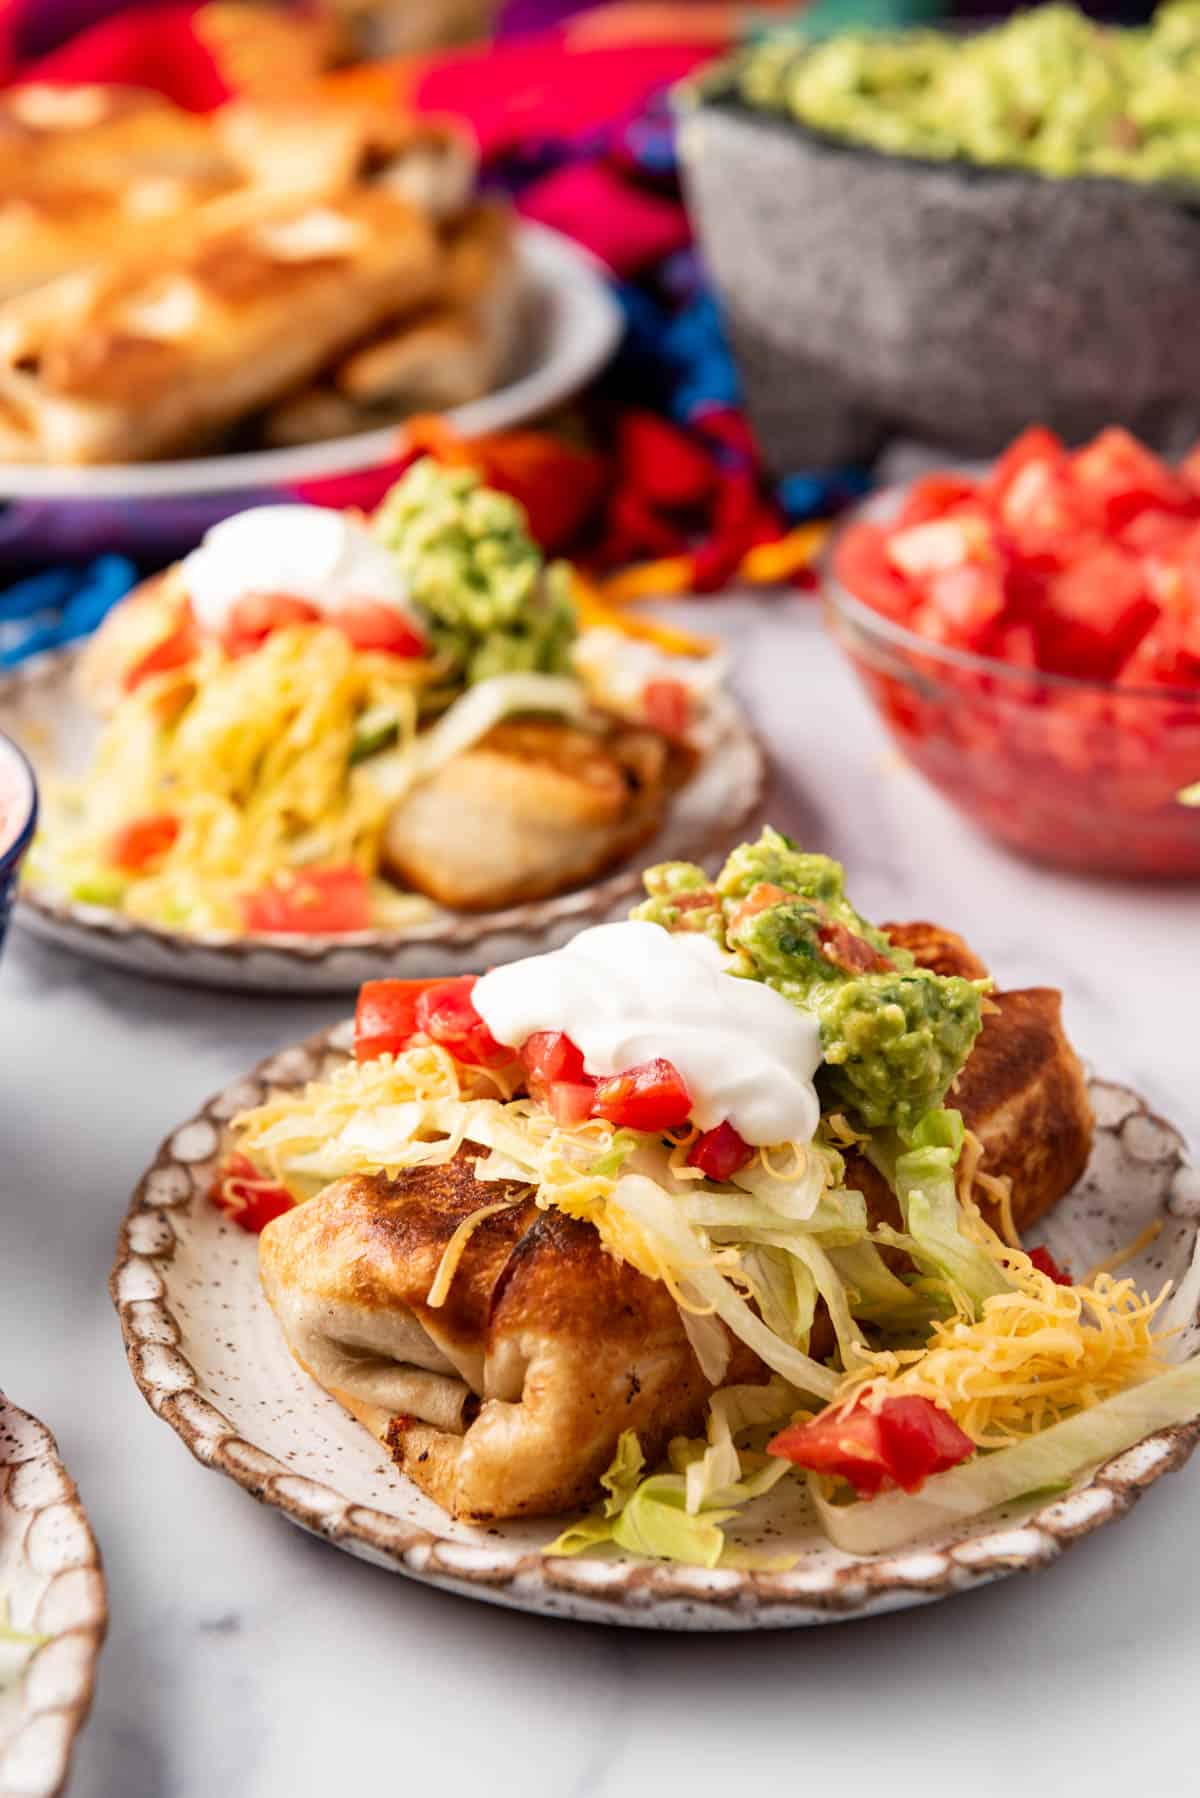 An image of shredded beef chimichangas on plates topped with sour cream, guacamole, cheese, shredded lettuce, and tomatoes.